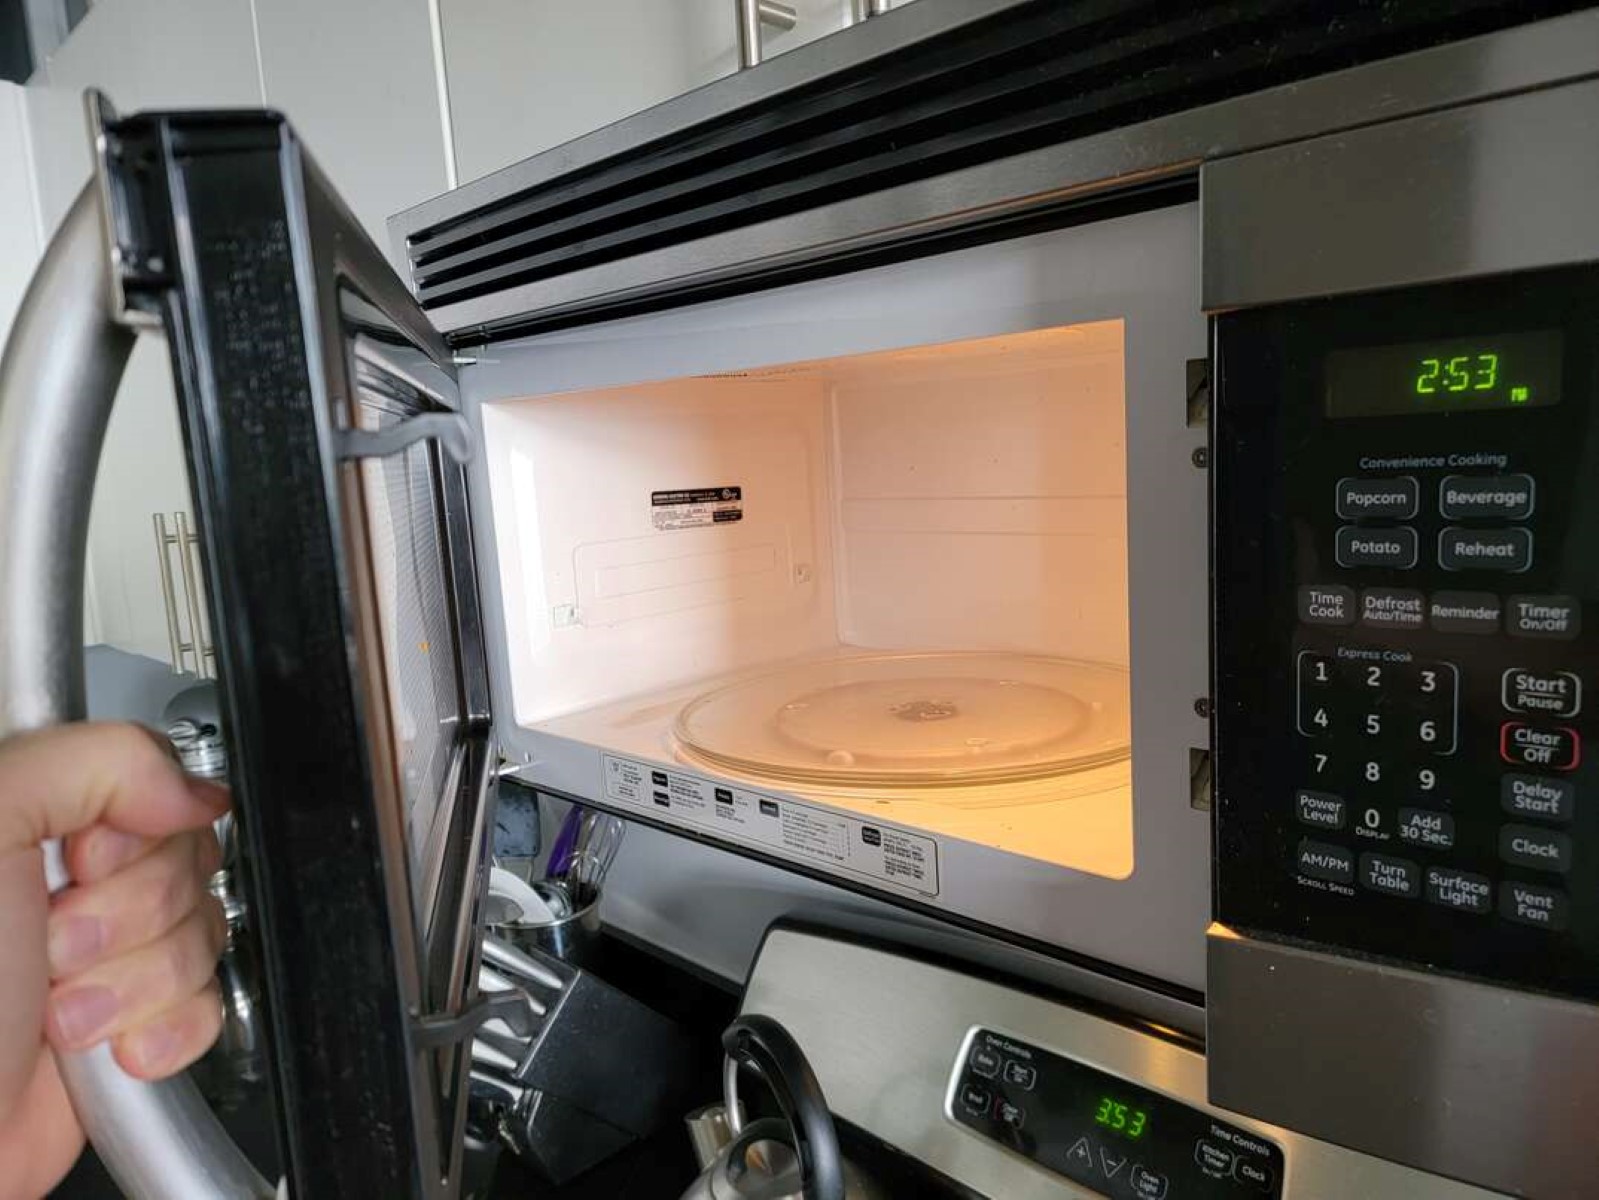 How To Fix The Error Code E-F1 For Samsung Microwave